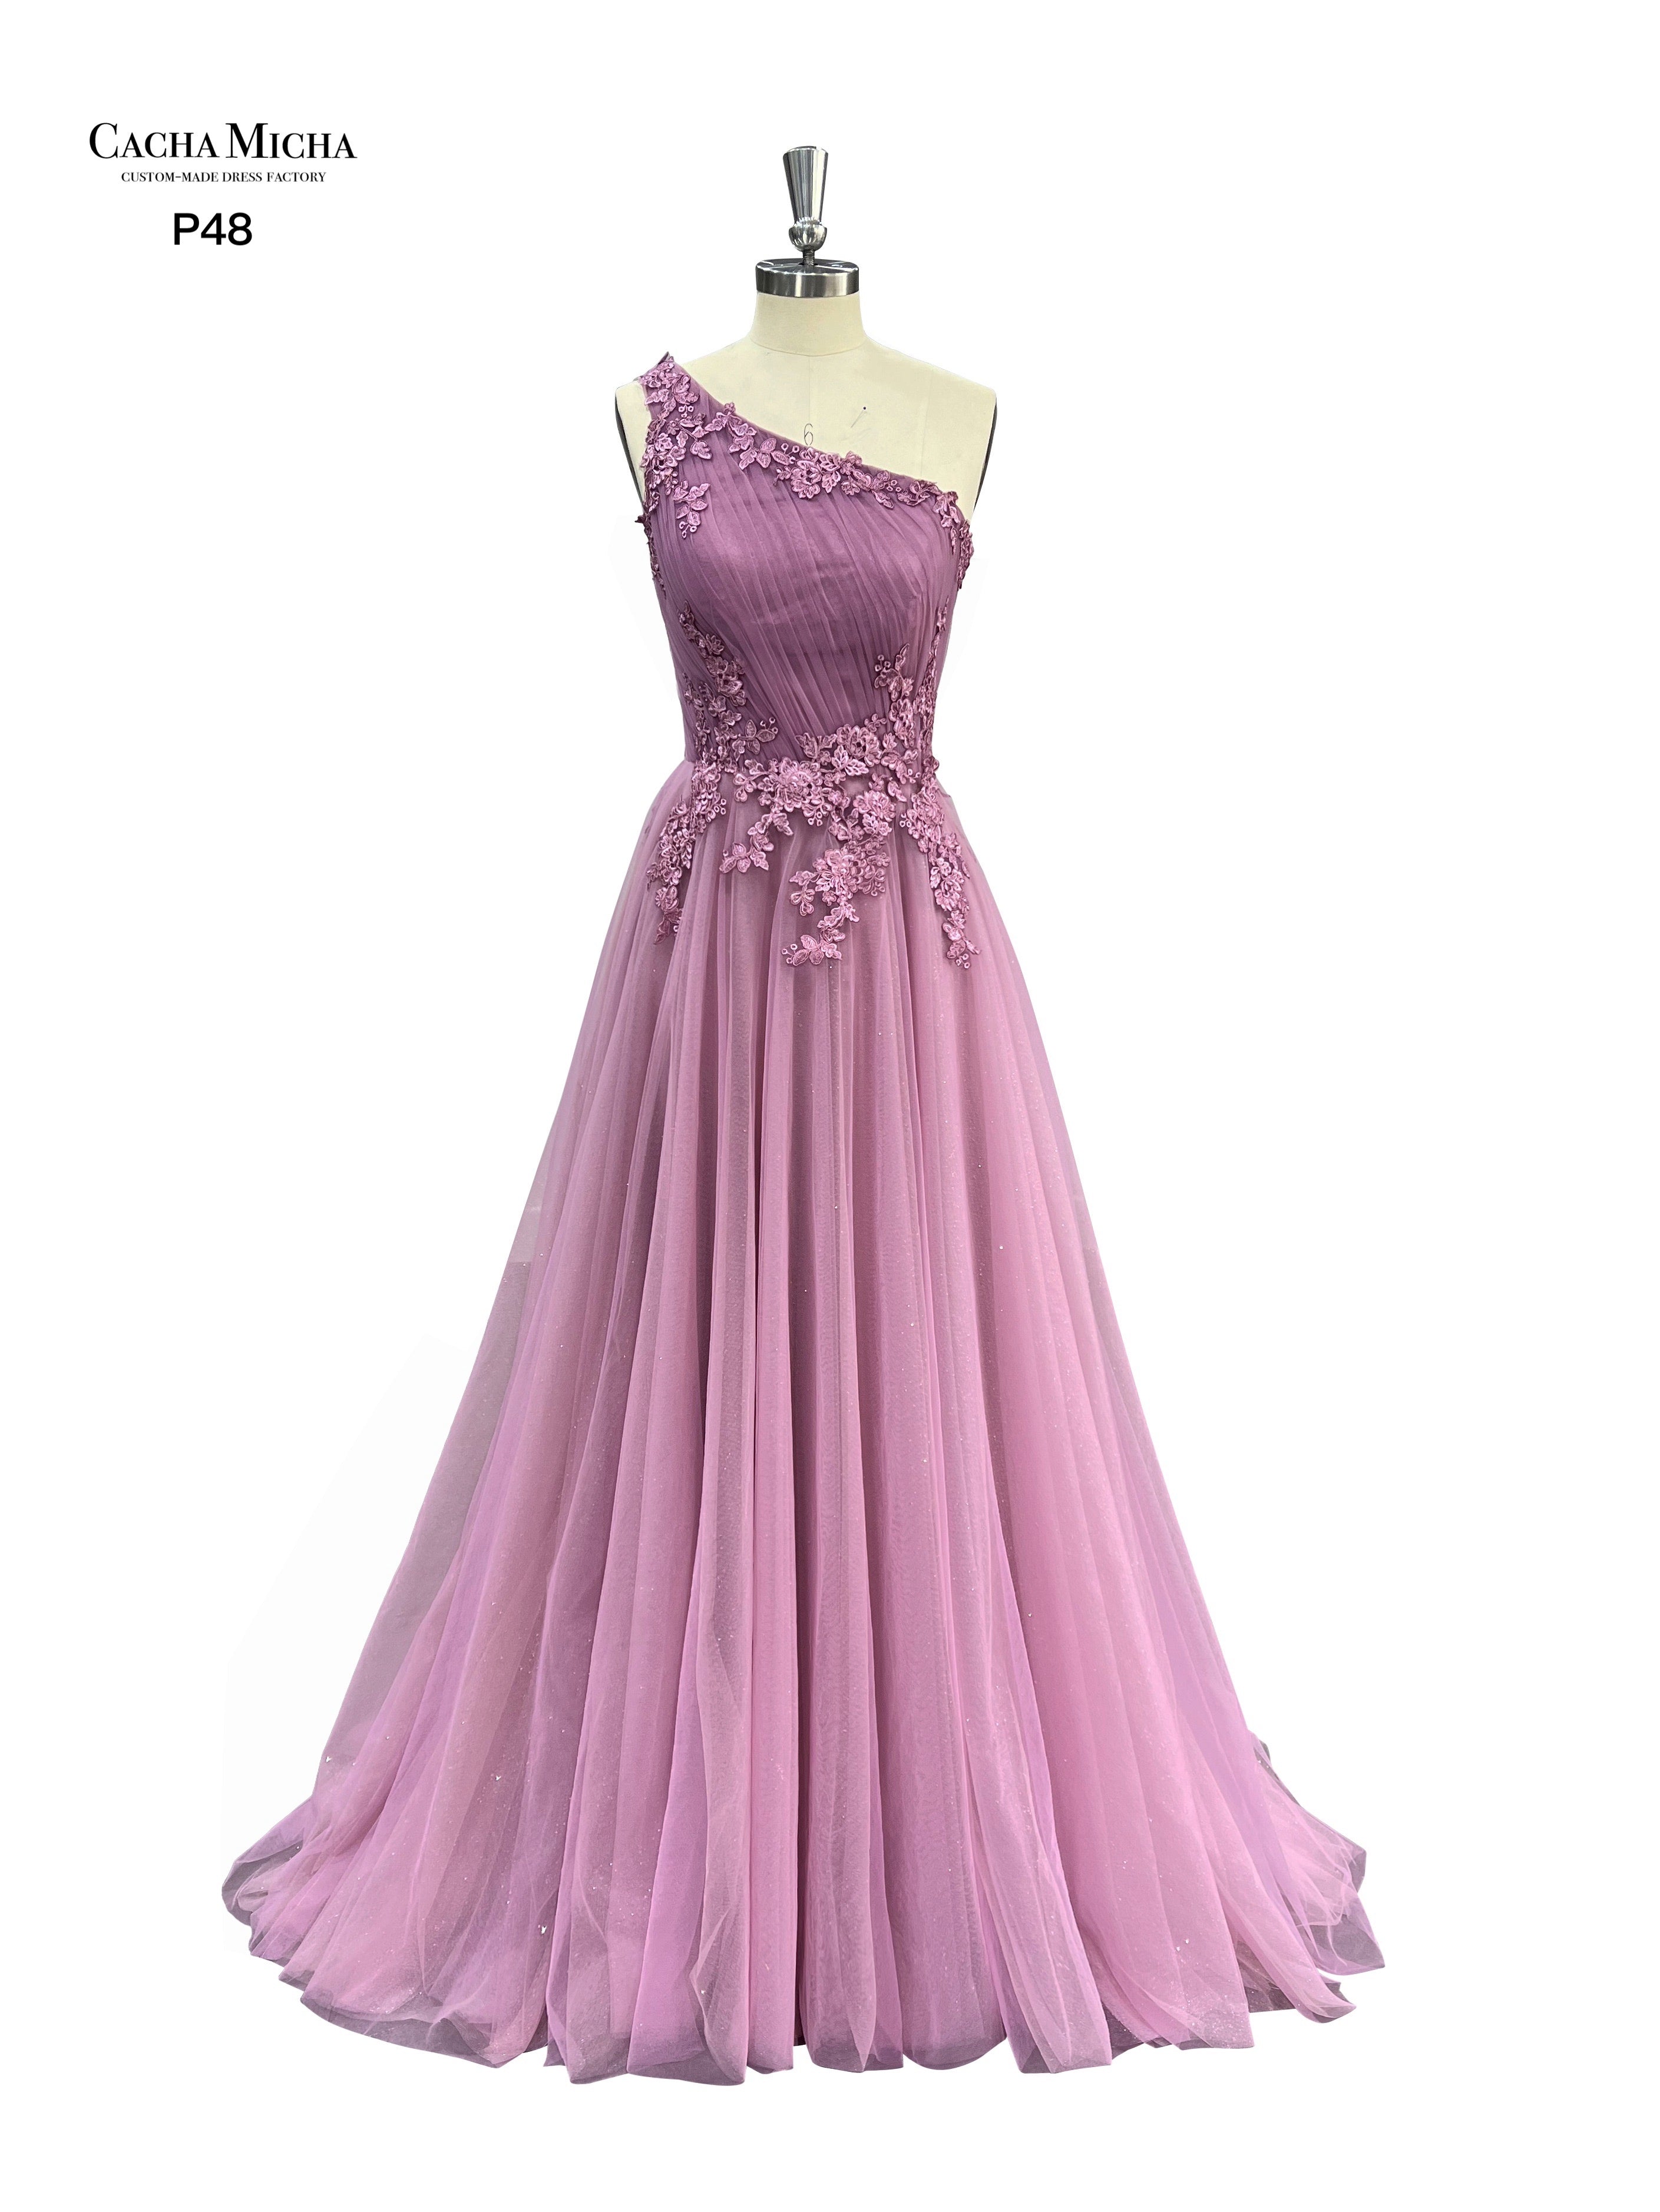 One Shoulder Pink Lace A Line Prom Dress P48